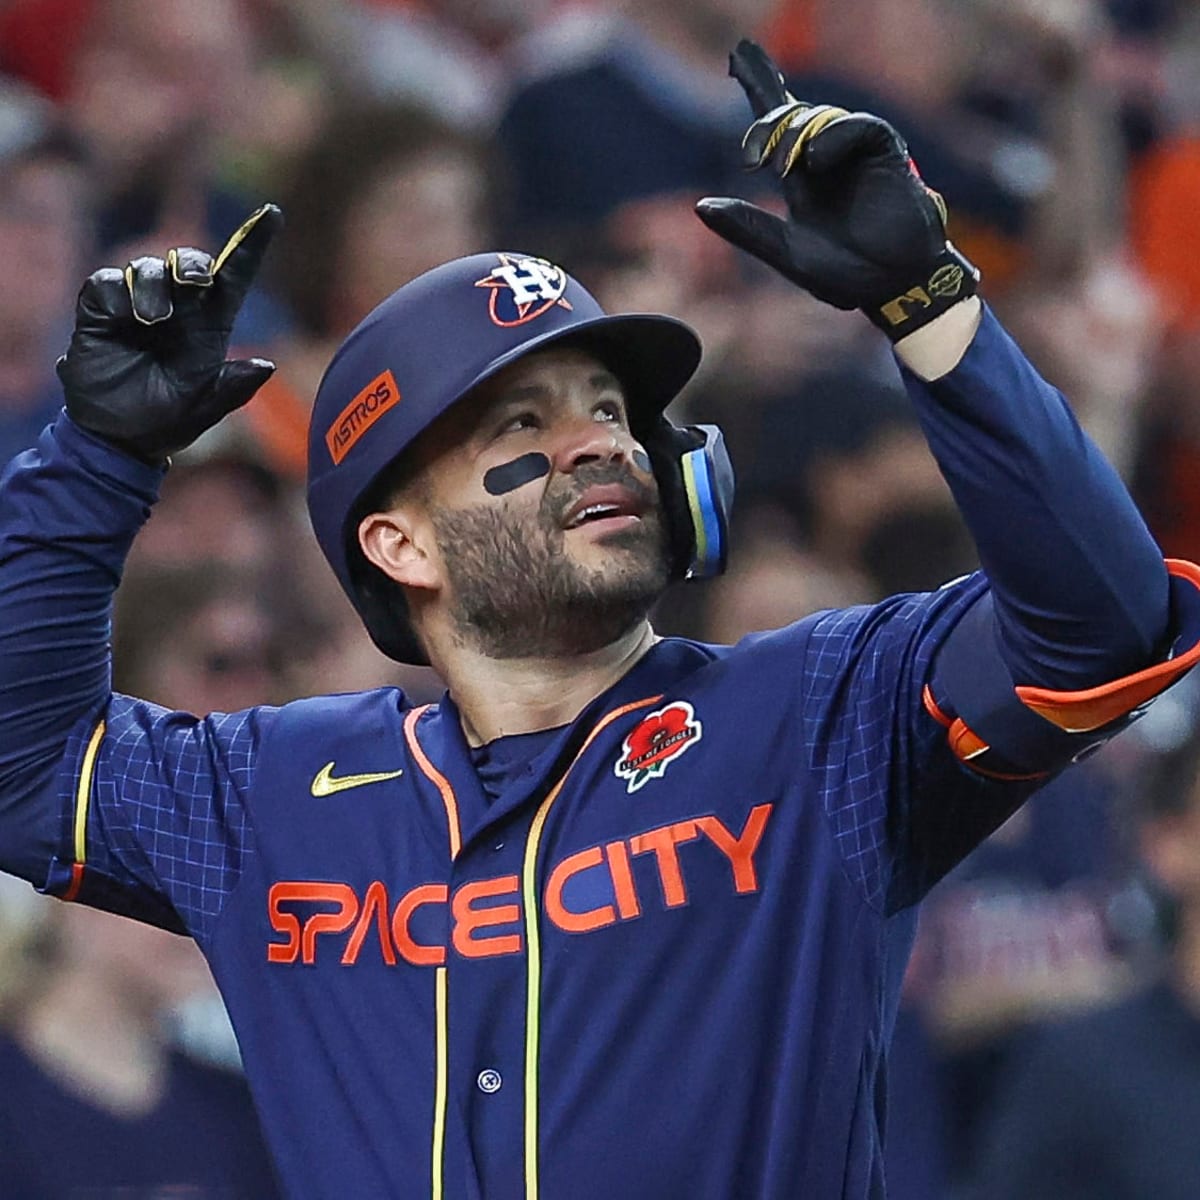 MLB Best Bet: Taking the Astros With Plus Money at Home Is a No